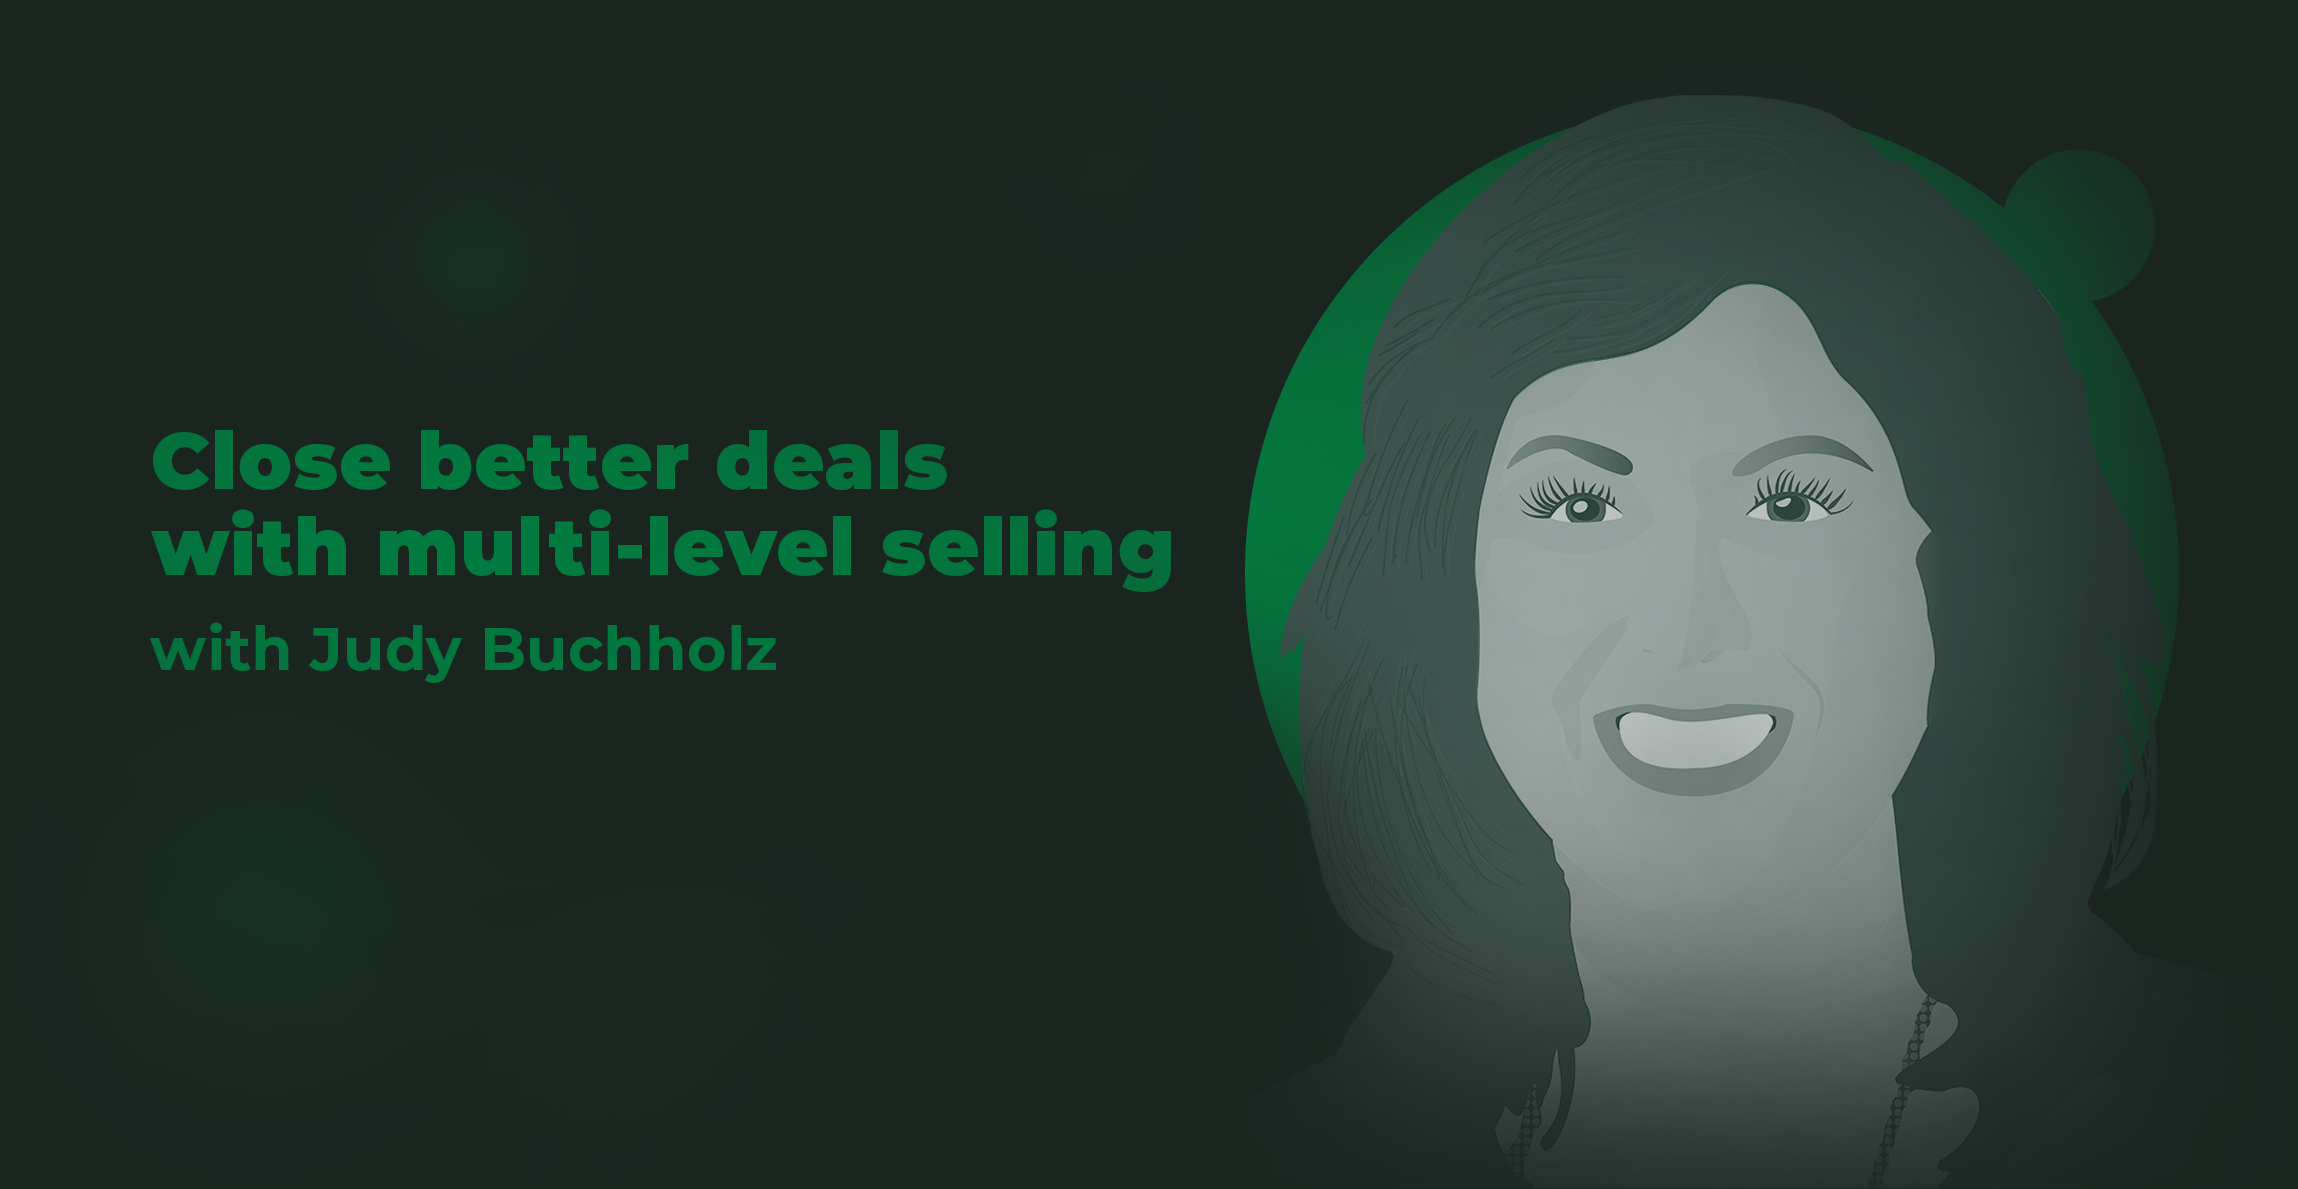 How to win with multi-level selling, with Pegasystems’ Judy Buchholz